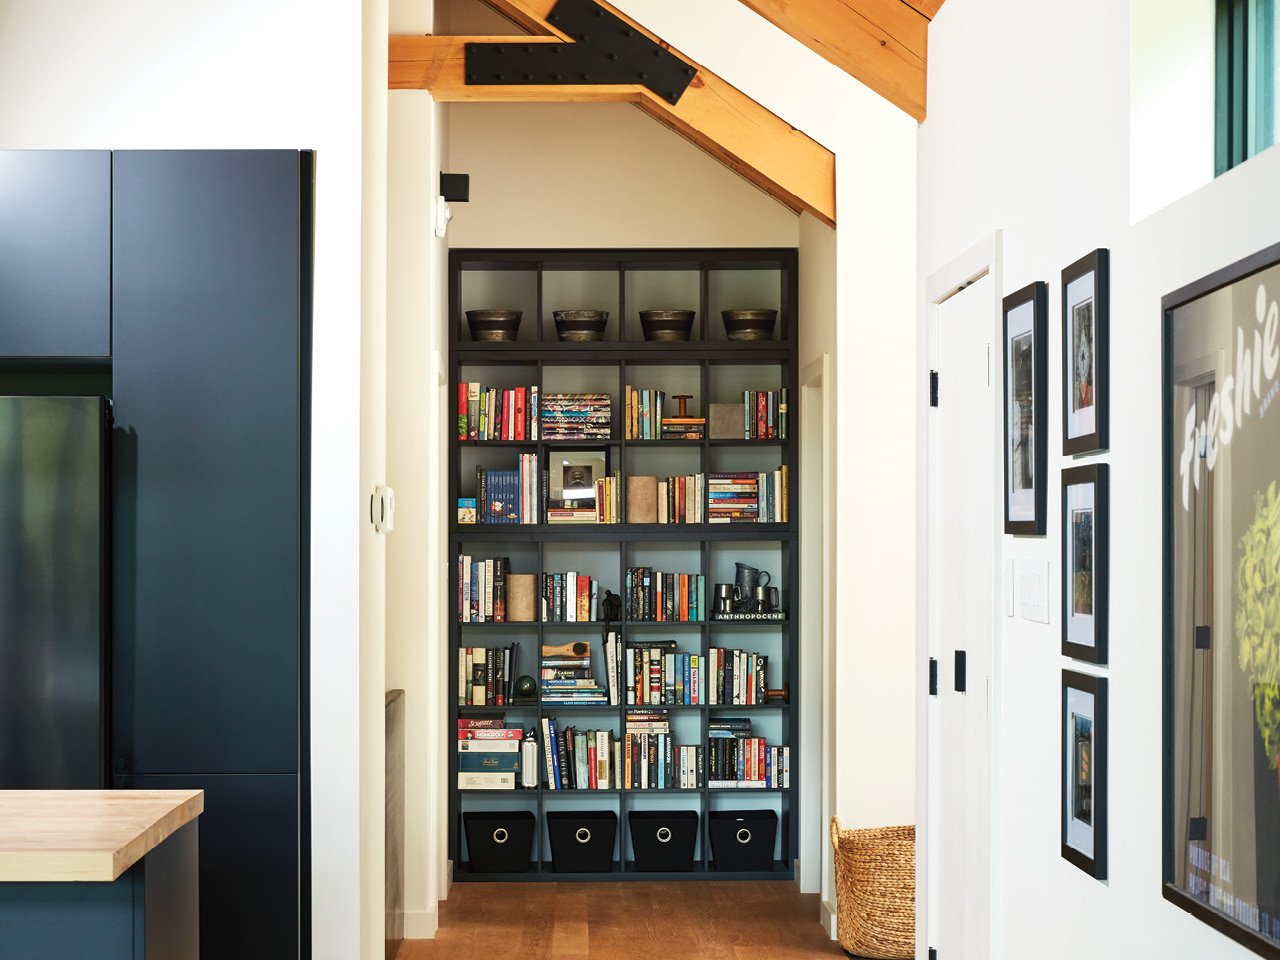 A black Ikea bookshelf tucked into the end of a hallway so that it looks custom-made for the nook.